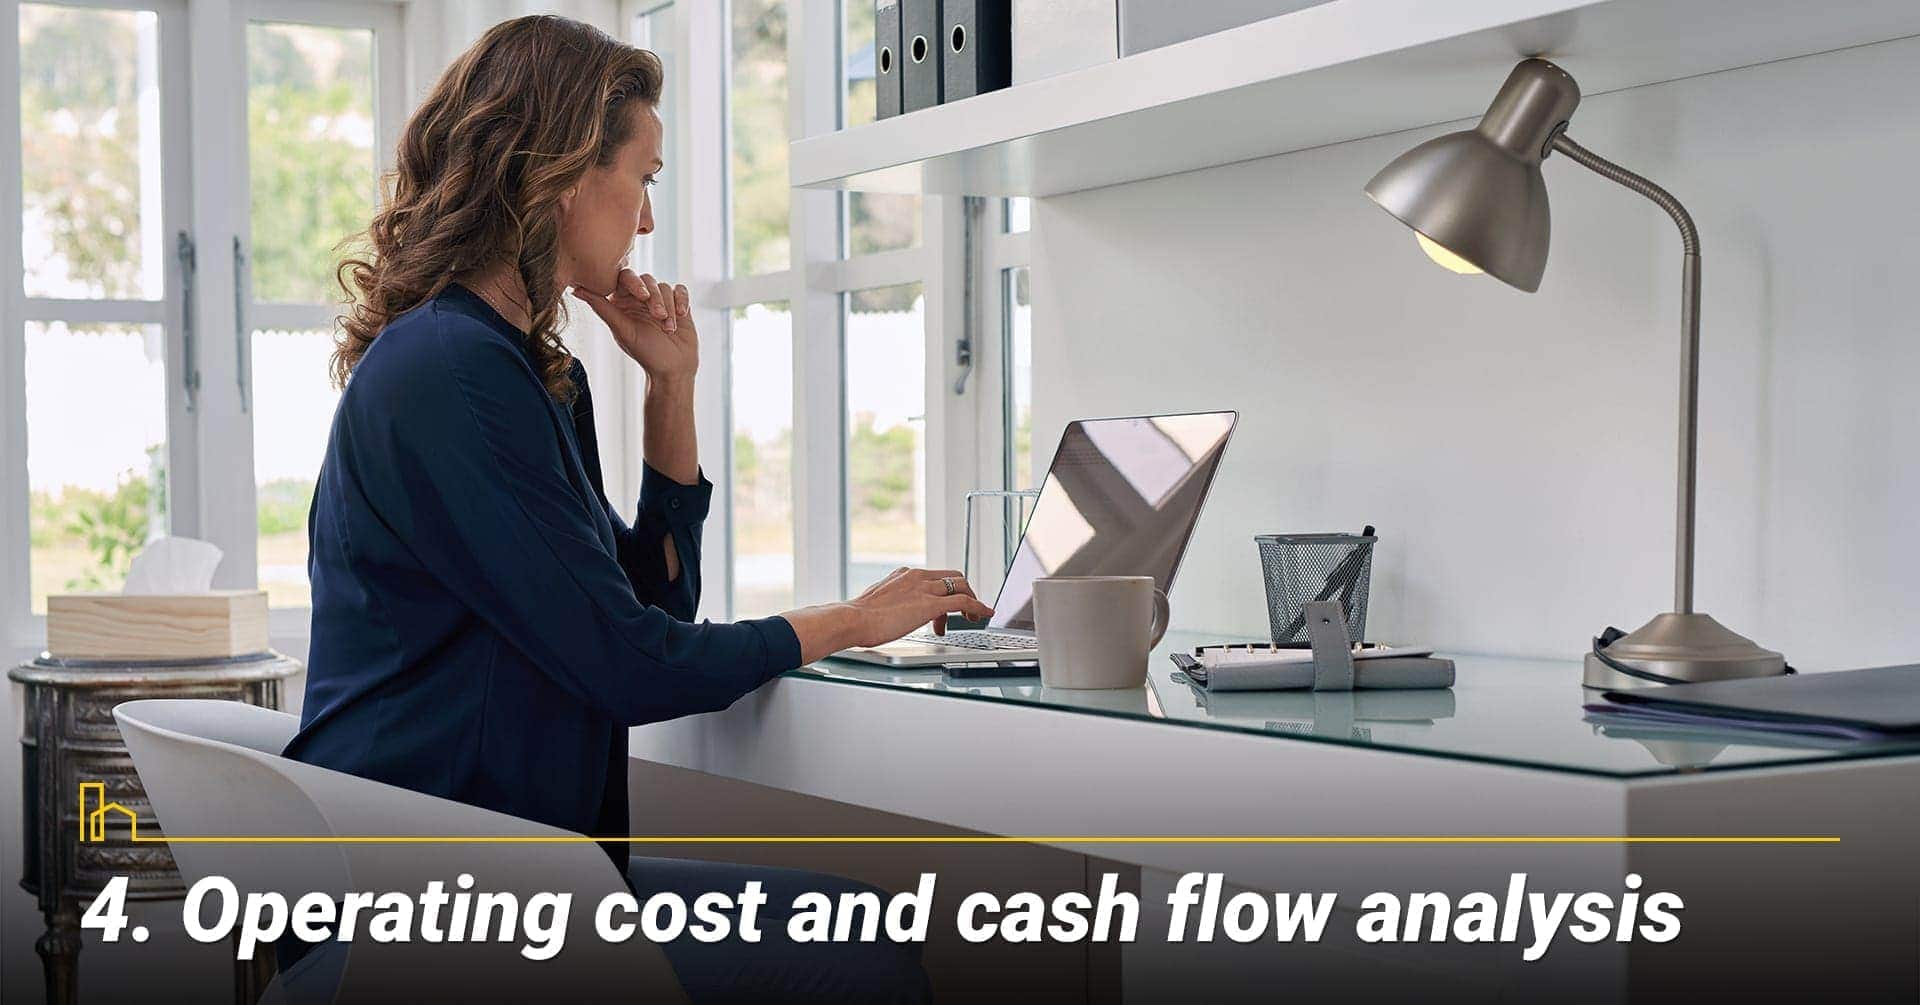 Operating cost and cash flow analysis, conduct your own analysis